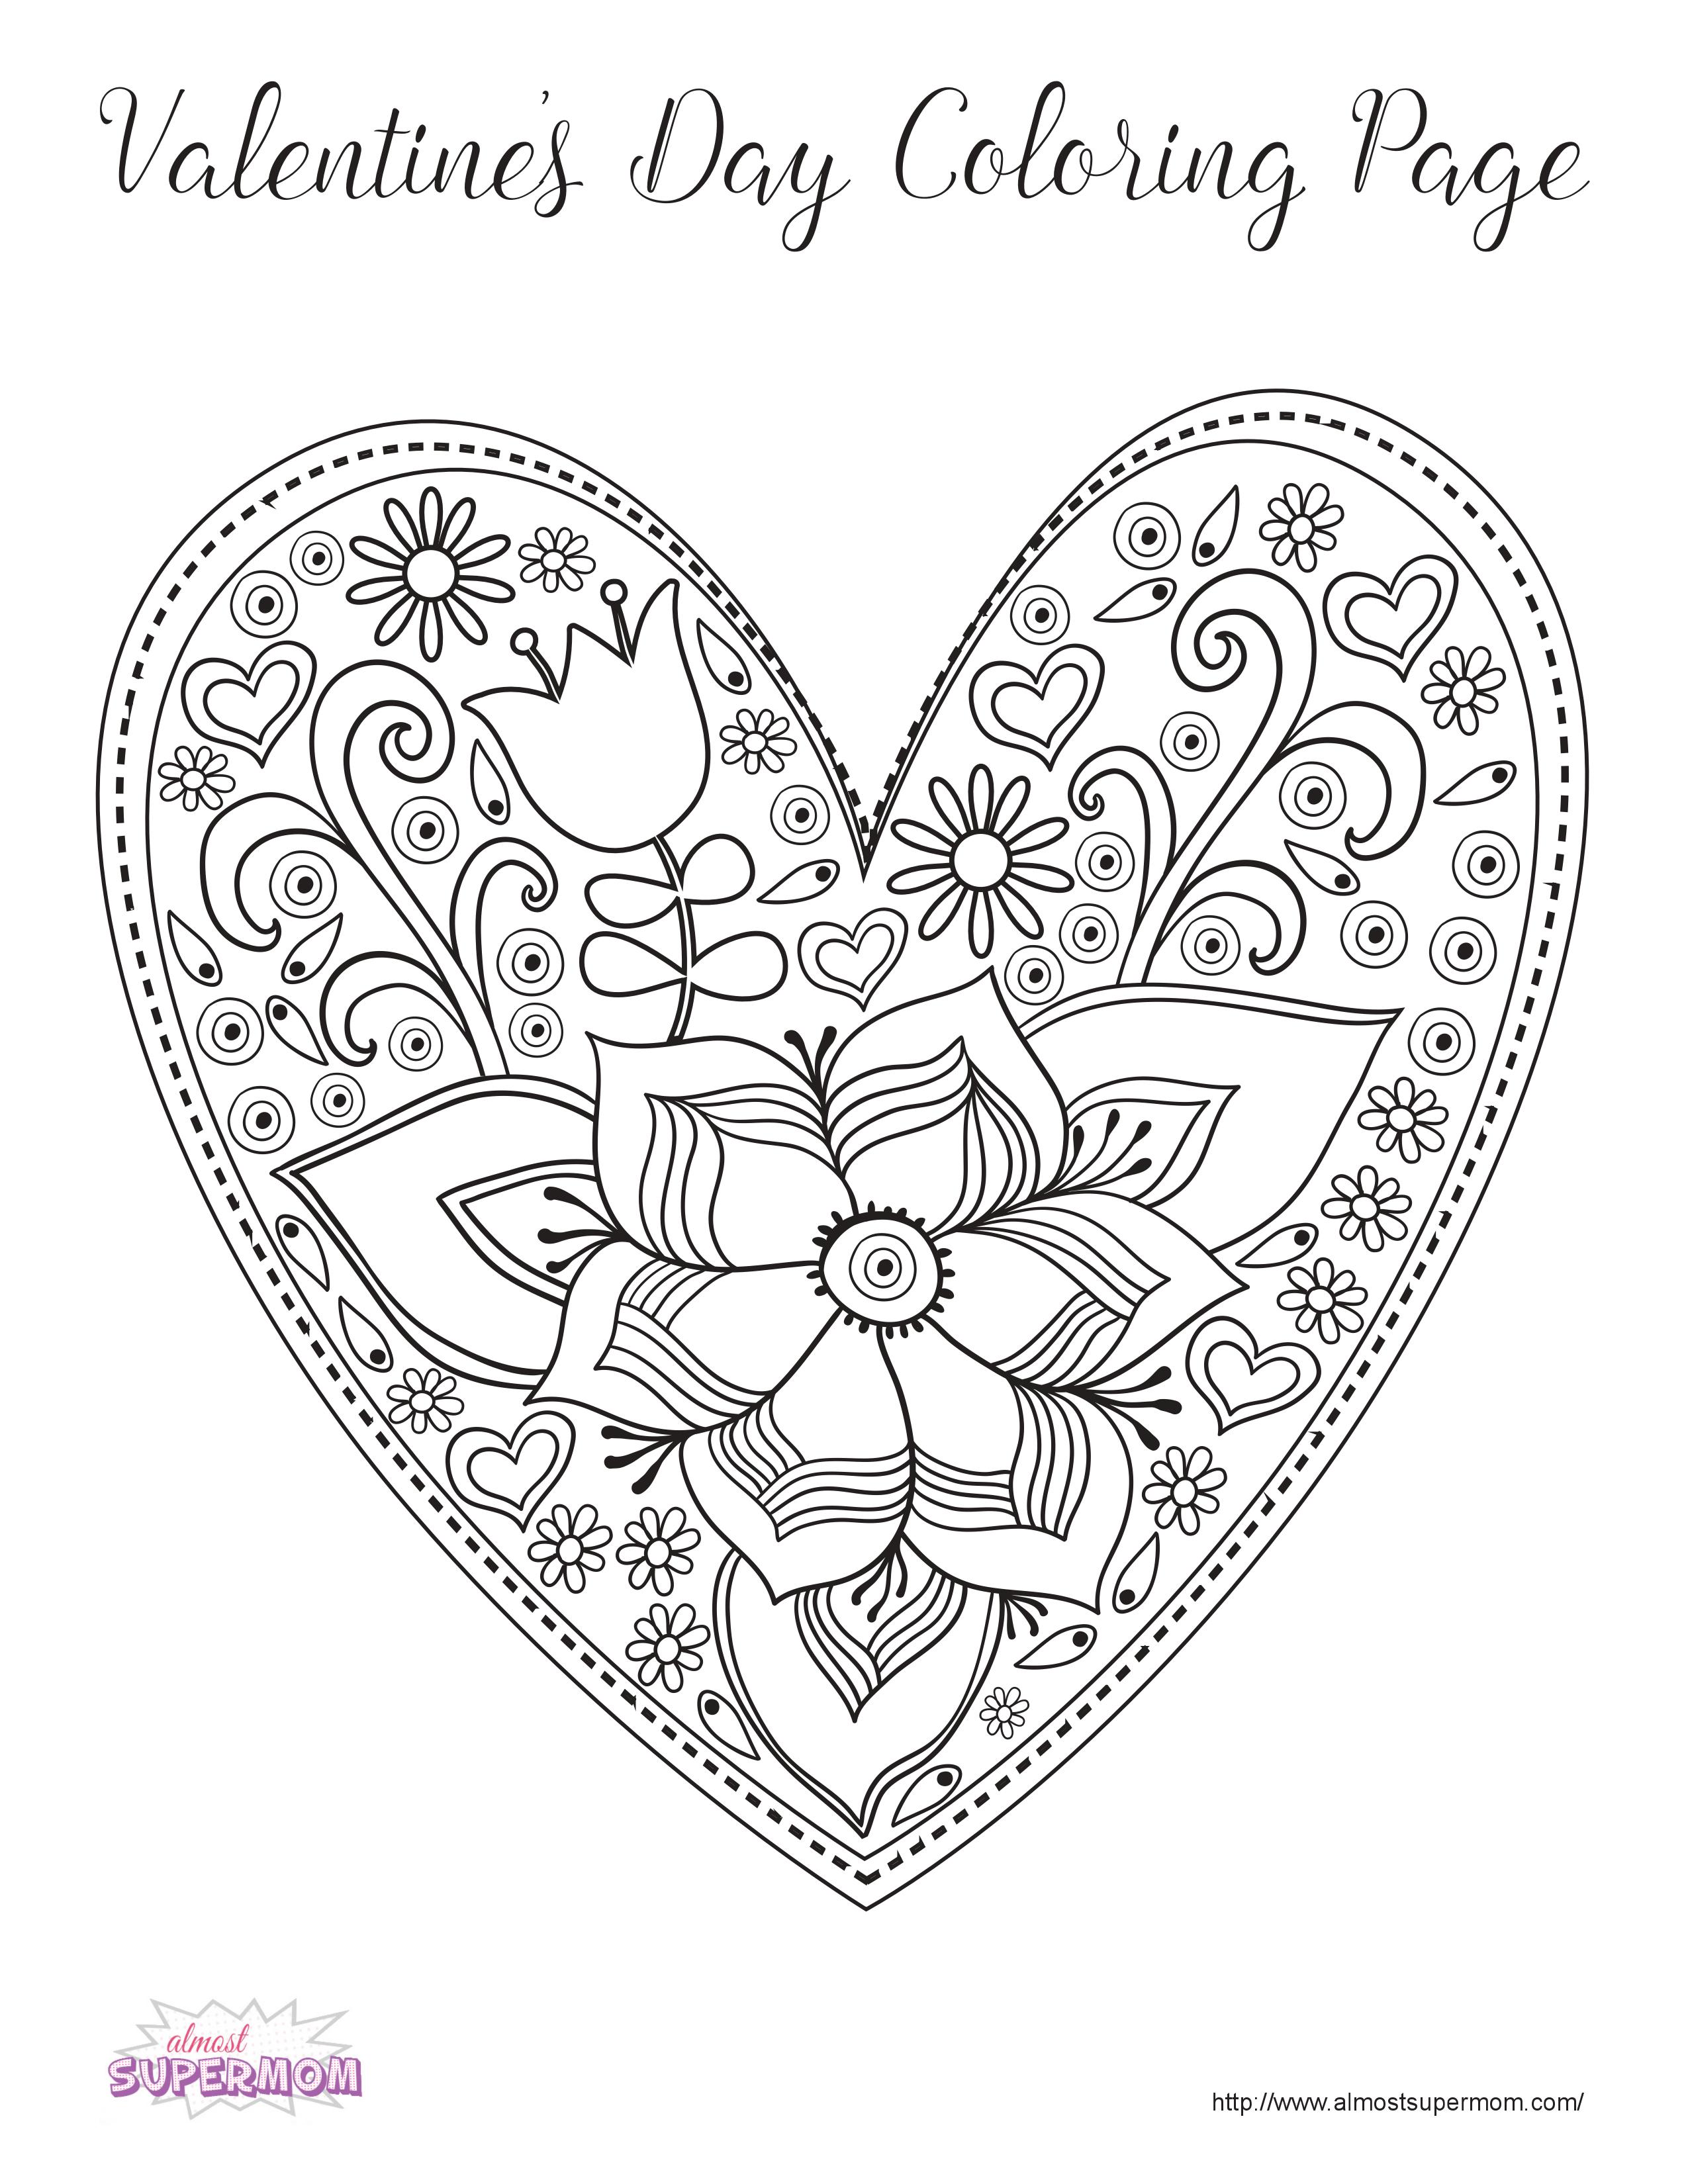 FREE Valentine s Day Coloring Pages For Grown Ups Almost Supermom